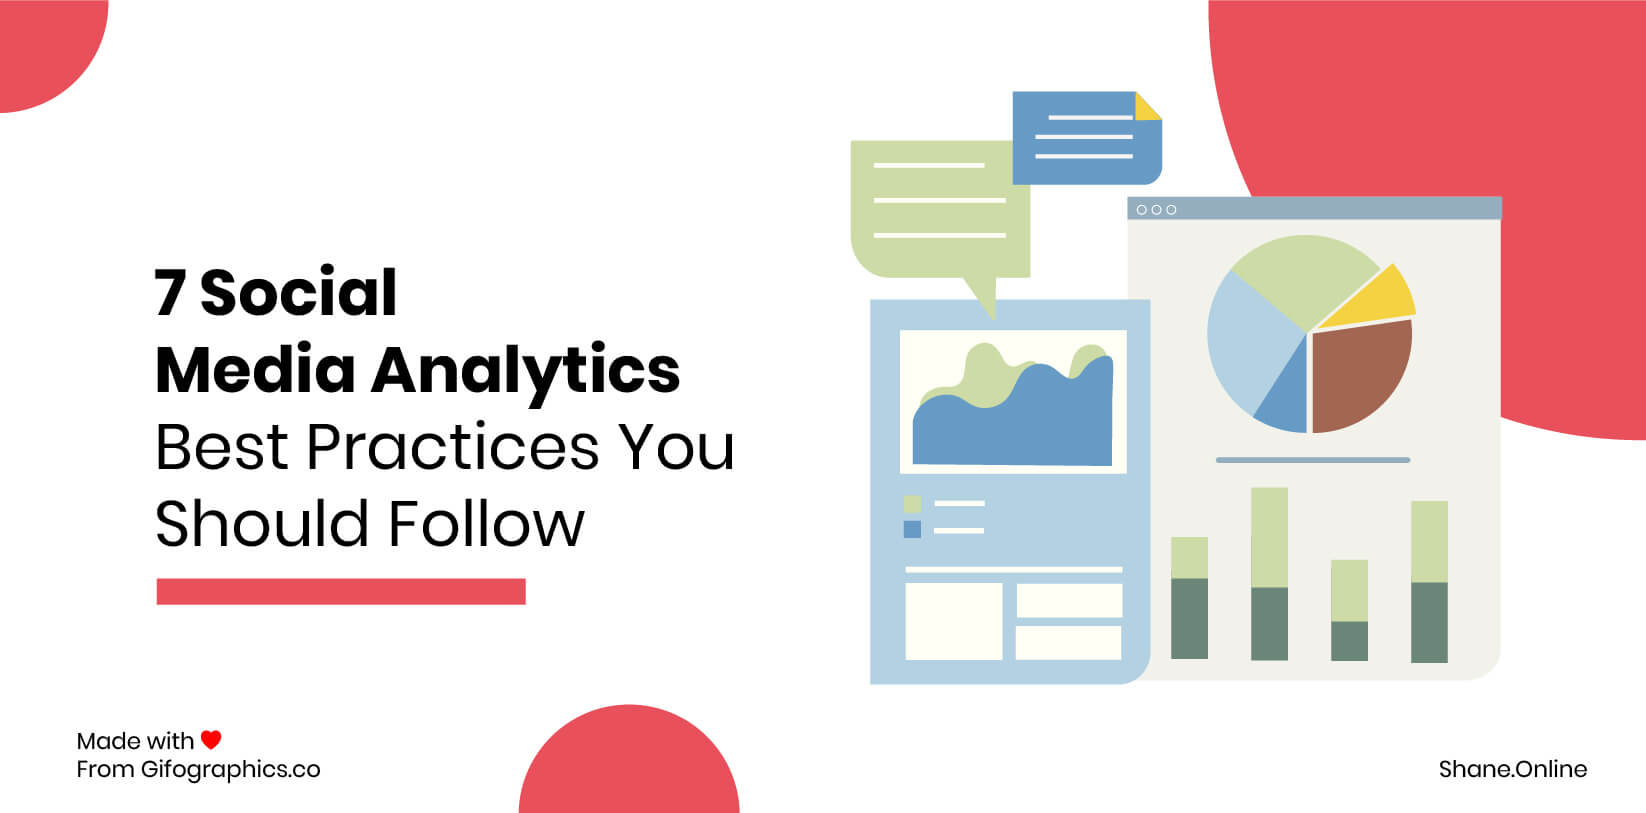 7 Social Media Analytics Best Practices You Should Follow